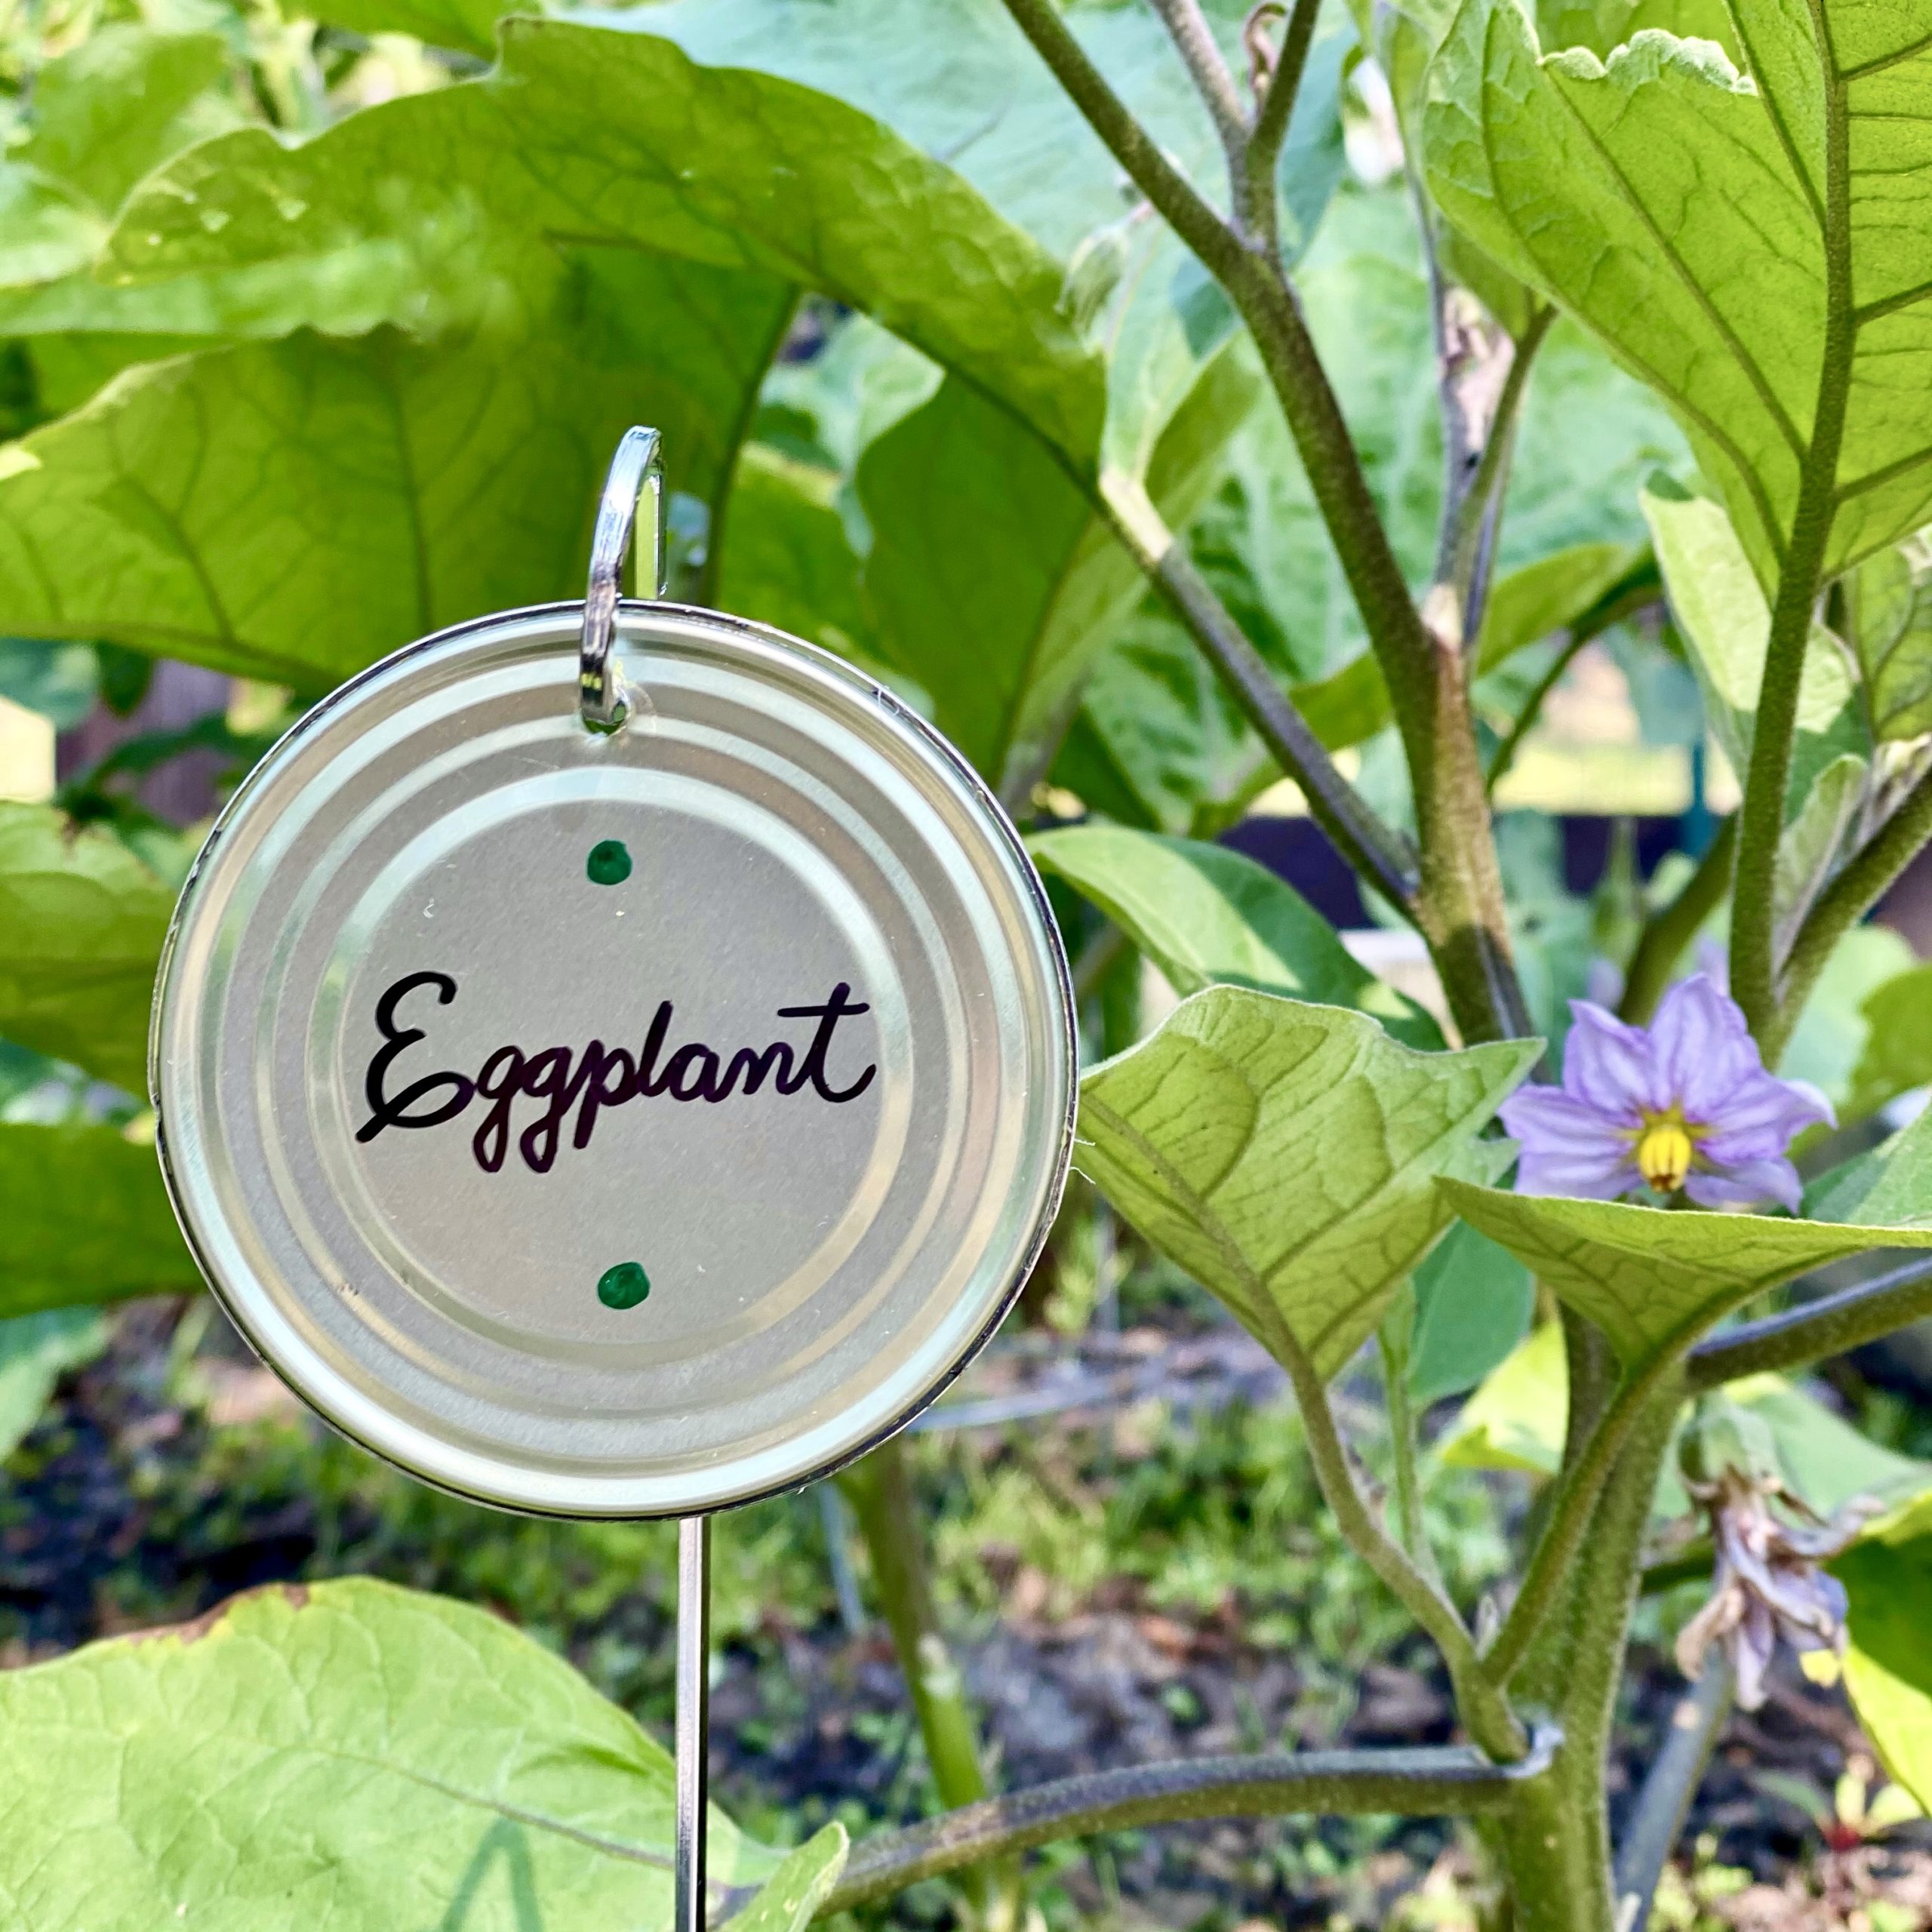 DIY garden marker with "eggplant" written on it next to an eggplant plant.